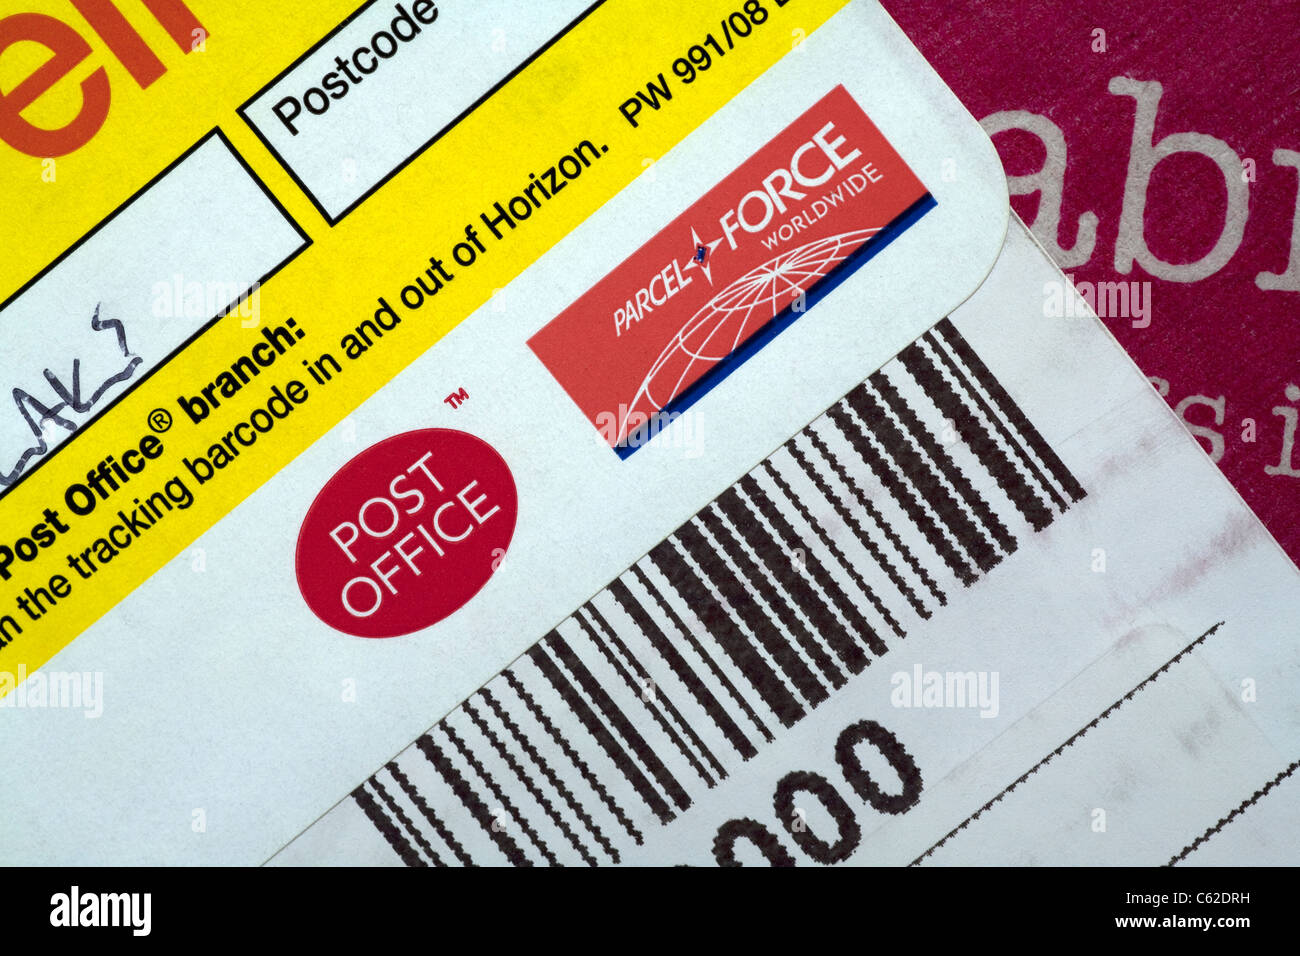 Detail of the bar code from a Parcel Force delivery and destination label  Stock Photo - Alamy